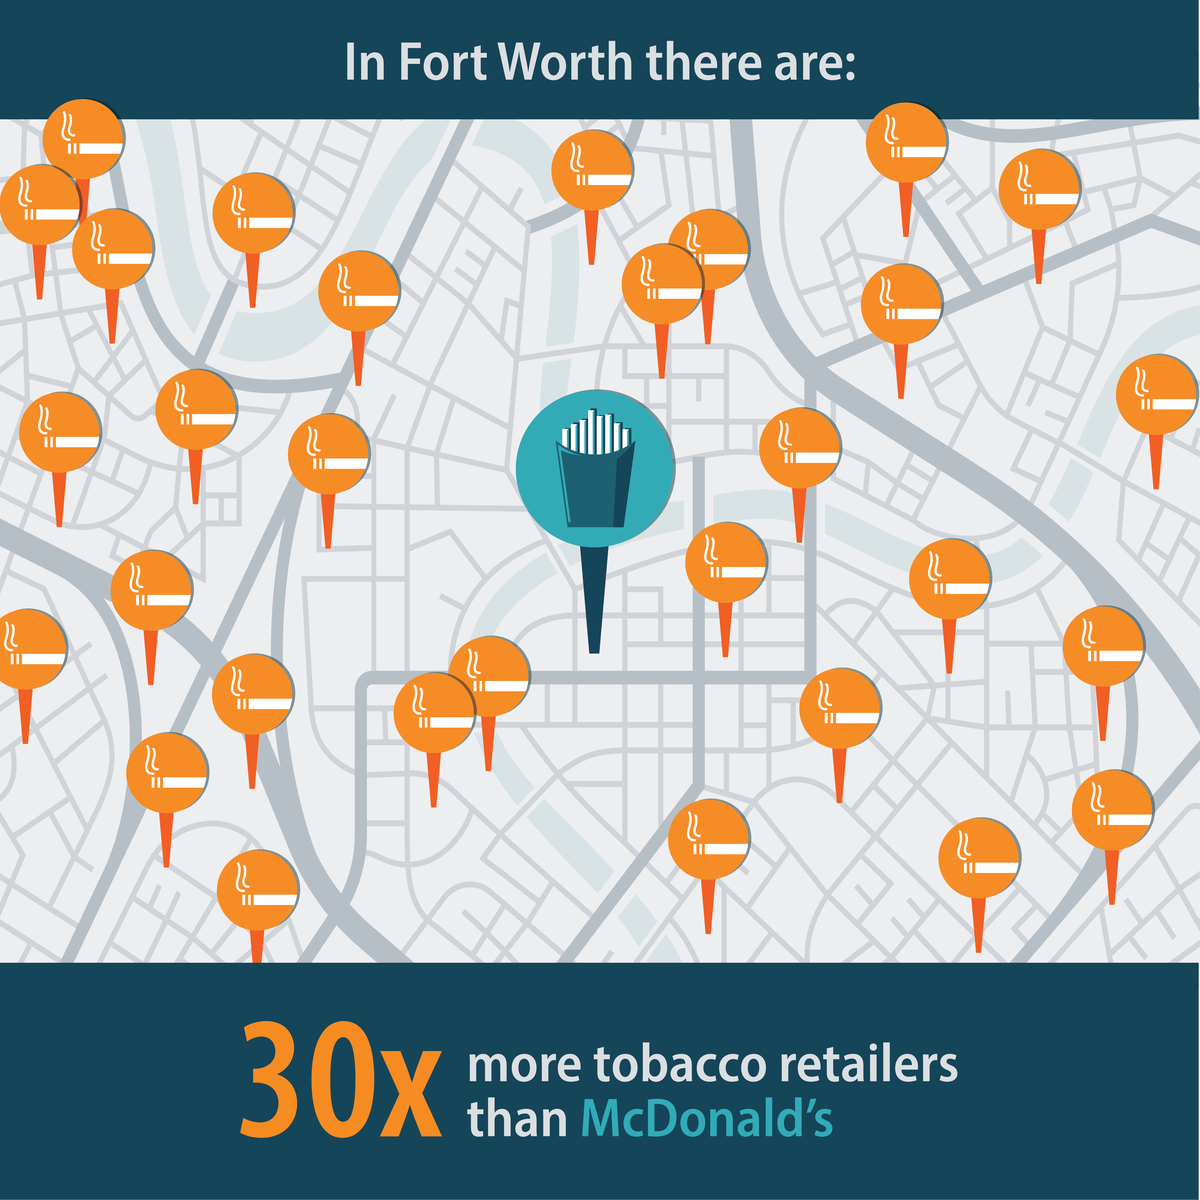 In Fort Worth there are: 30 times more tobacco retailers than McDonald's